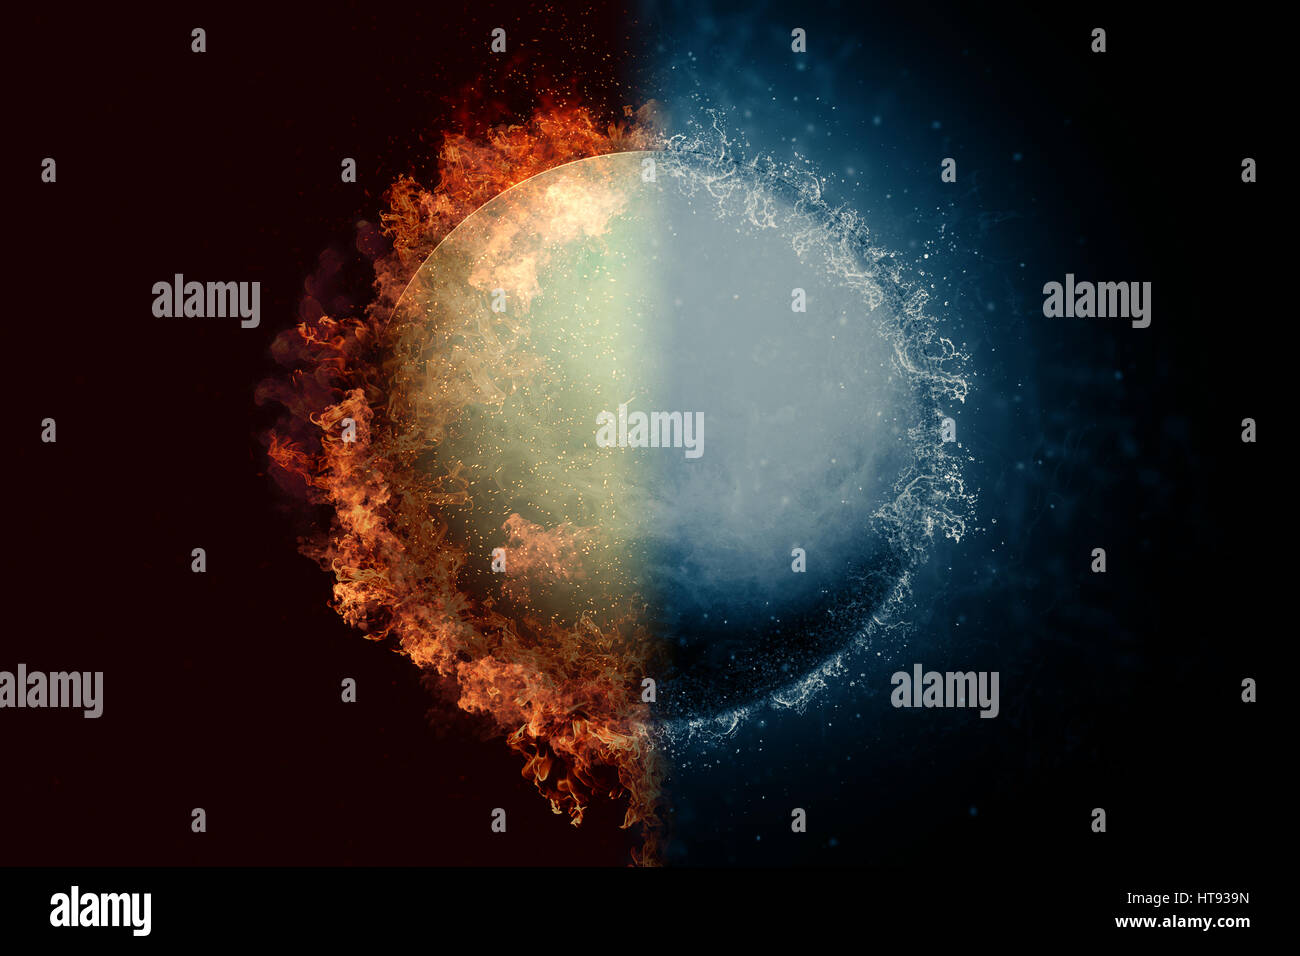 Planet Uranus in fire and water. Concept sci-fi artwork Stock Photo